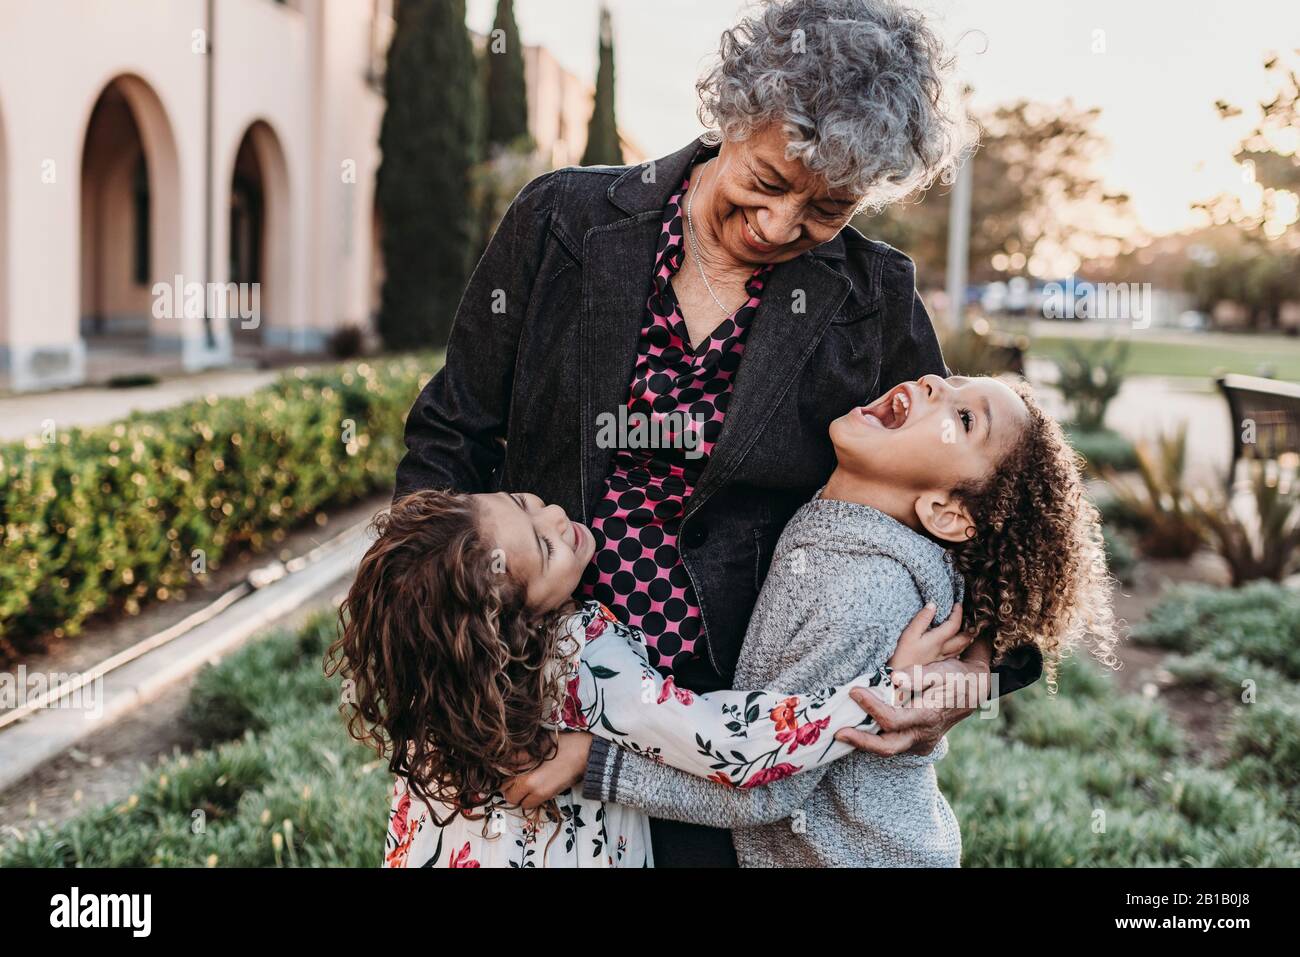 Close up lifestyle image of grandmother and grandchildren laughing Stock Photo